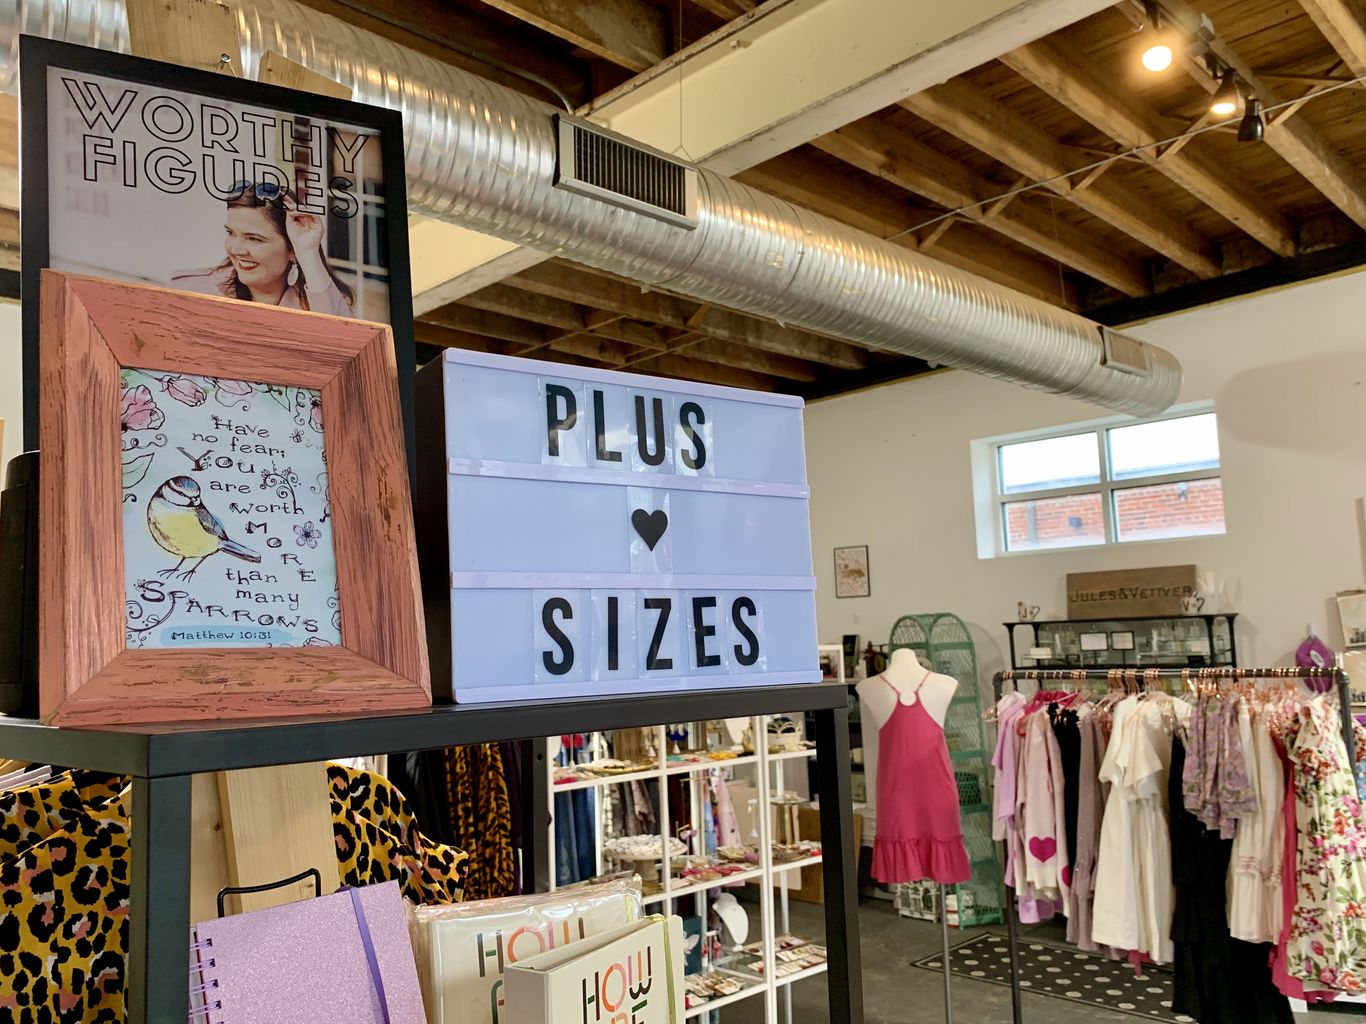 Plus-size women find fashion and inclusion at Charlotte store